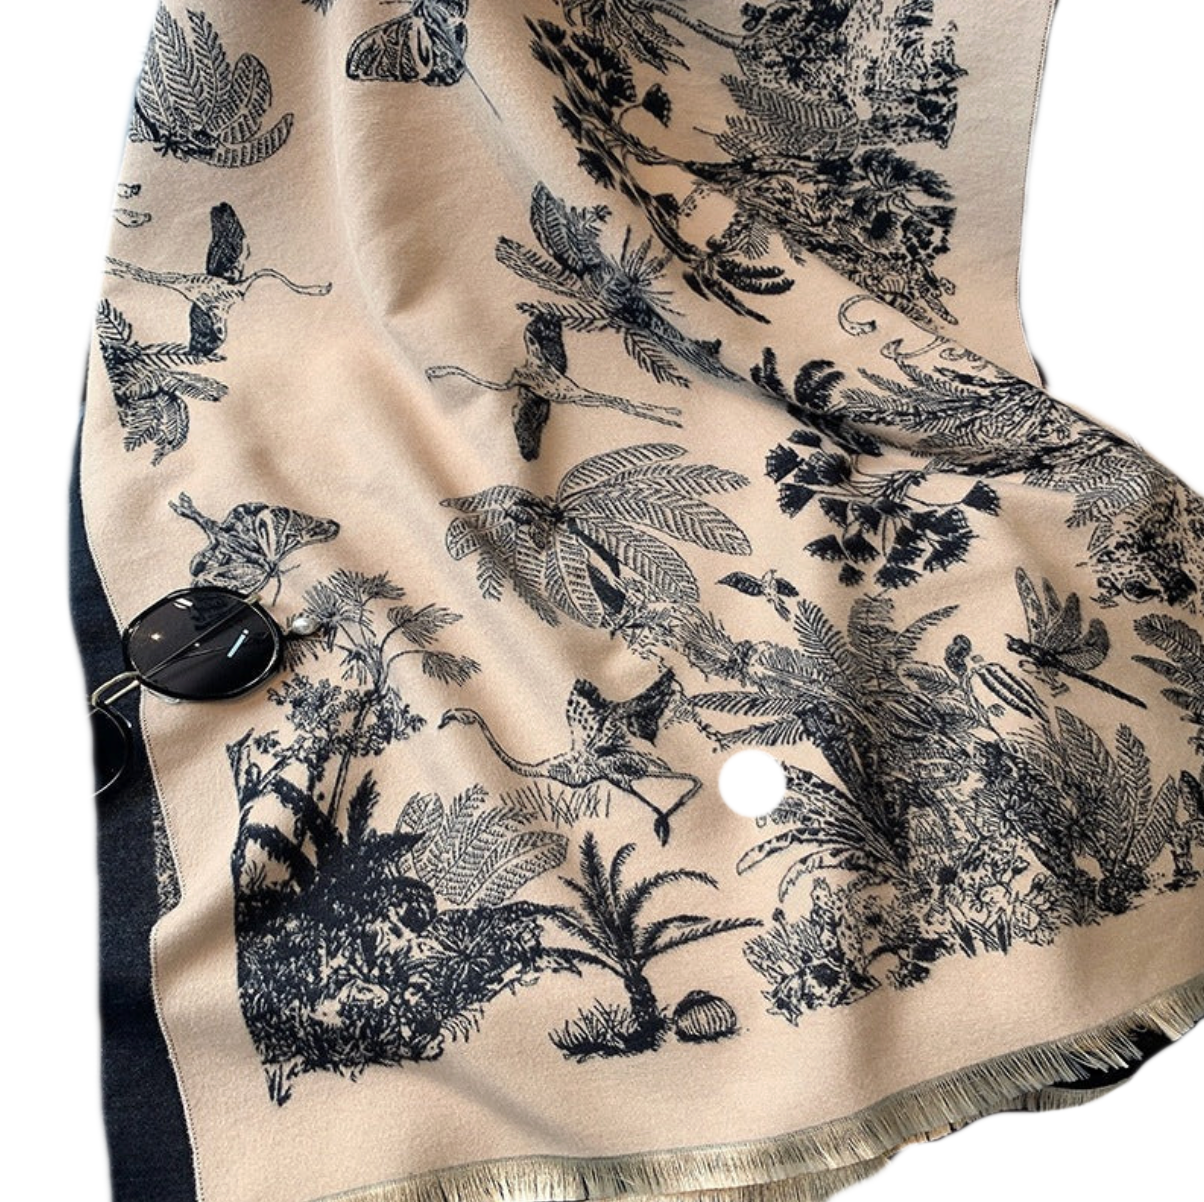 Ultra Luxurious Thick Warm Double-Sided Print and Colour Cashmere Scarf Shawl in Assorted Colours - BELLADONNA